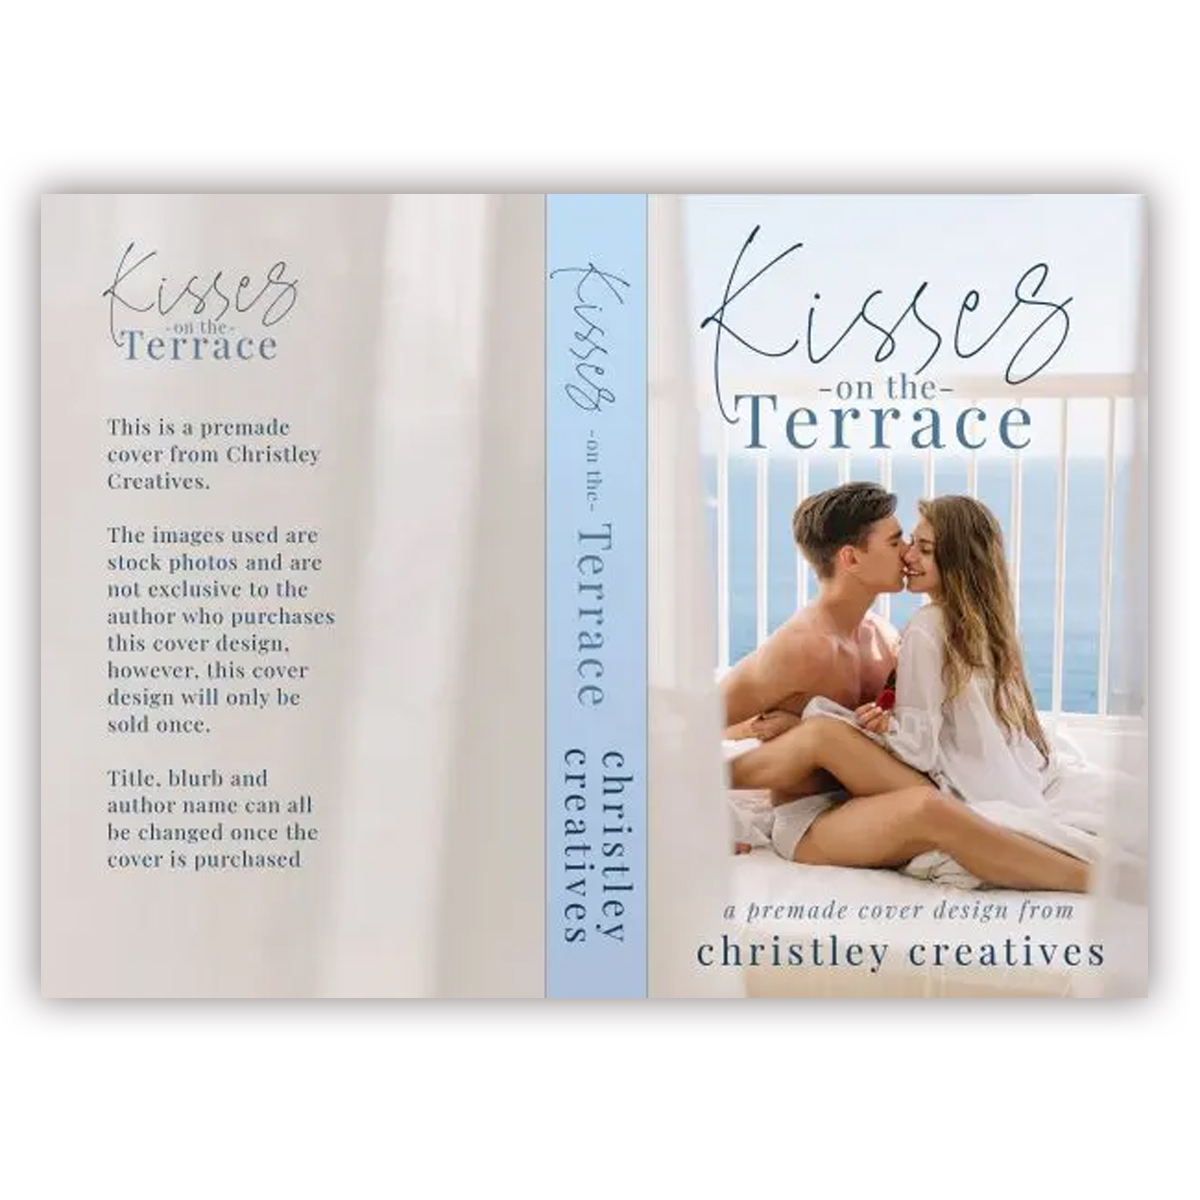 Kisses on the Terrace - Premade Contemporary Romance Book Cover from Christley Creatives